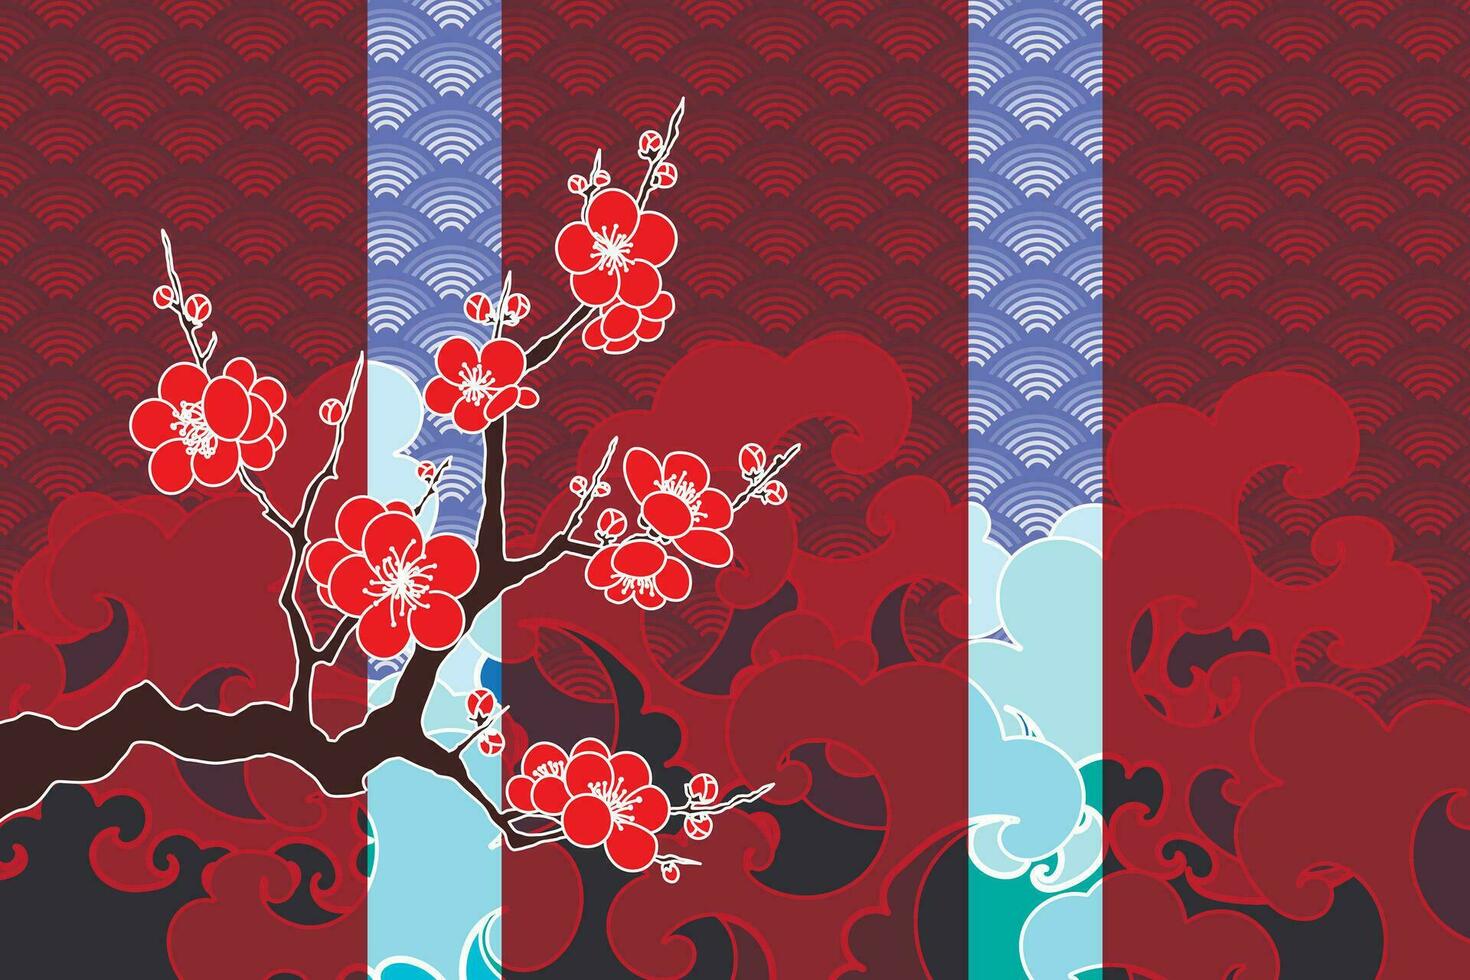 Illustration of the cherry blossoms flower on branch with wave background. vector